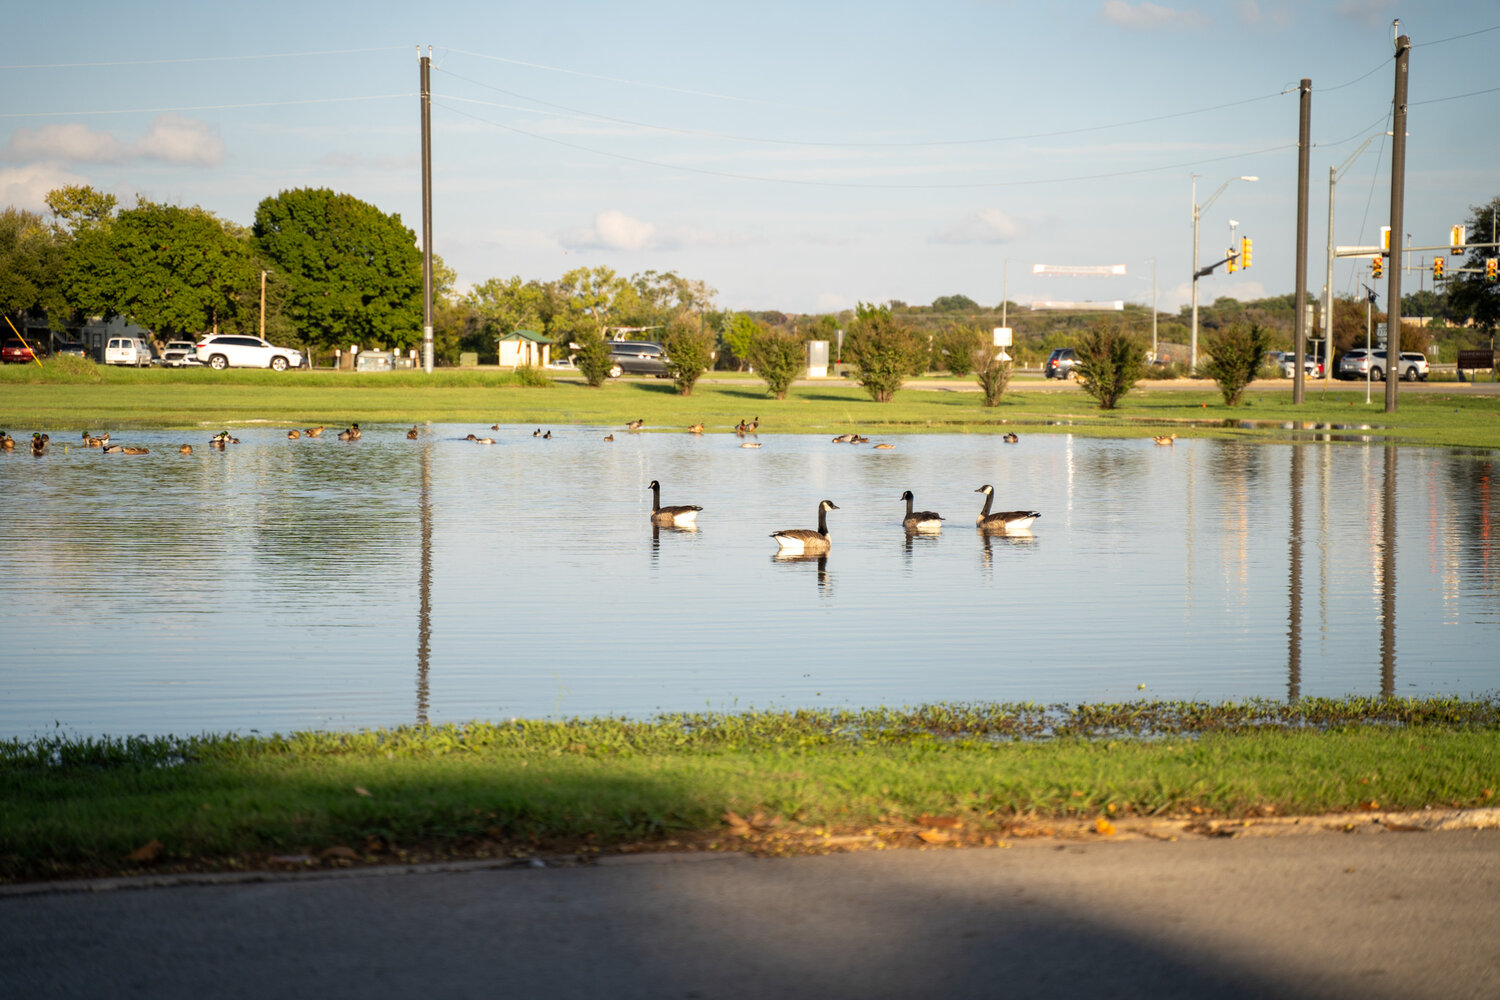 A large pool of water formed in front of the Brazos Harbor community next to Brazos Harbor Drive in Granbury on Oct. 26 from the hours of rain that fell on Oct. 25. Some geese decided to take a dip in the new area of water.